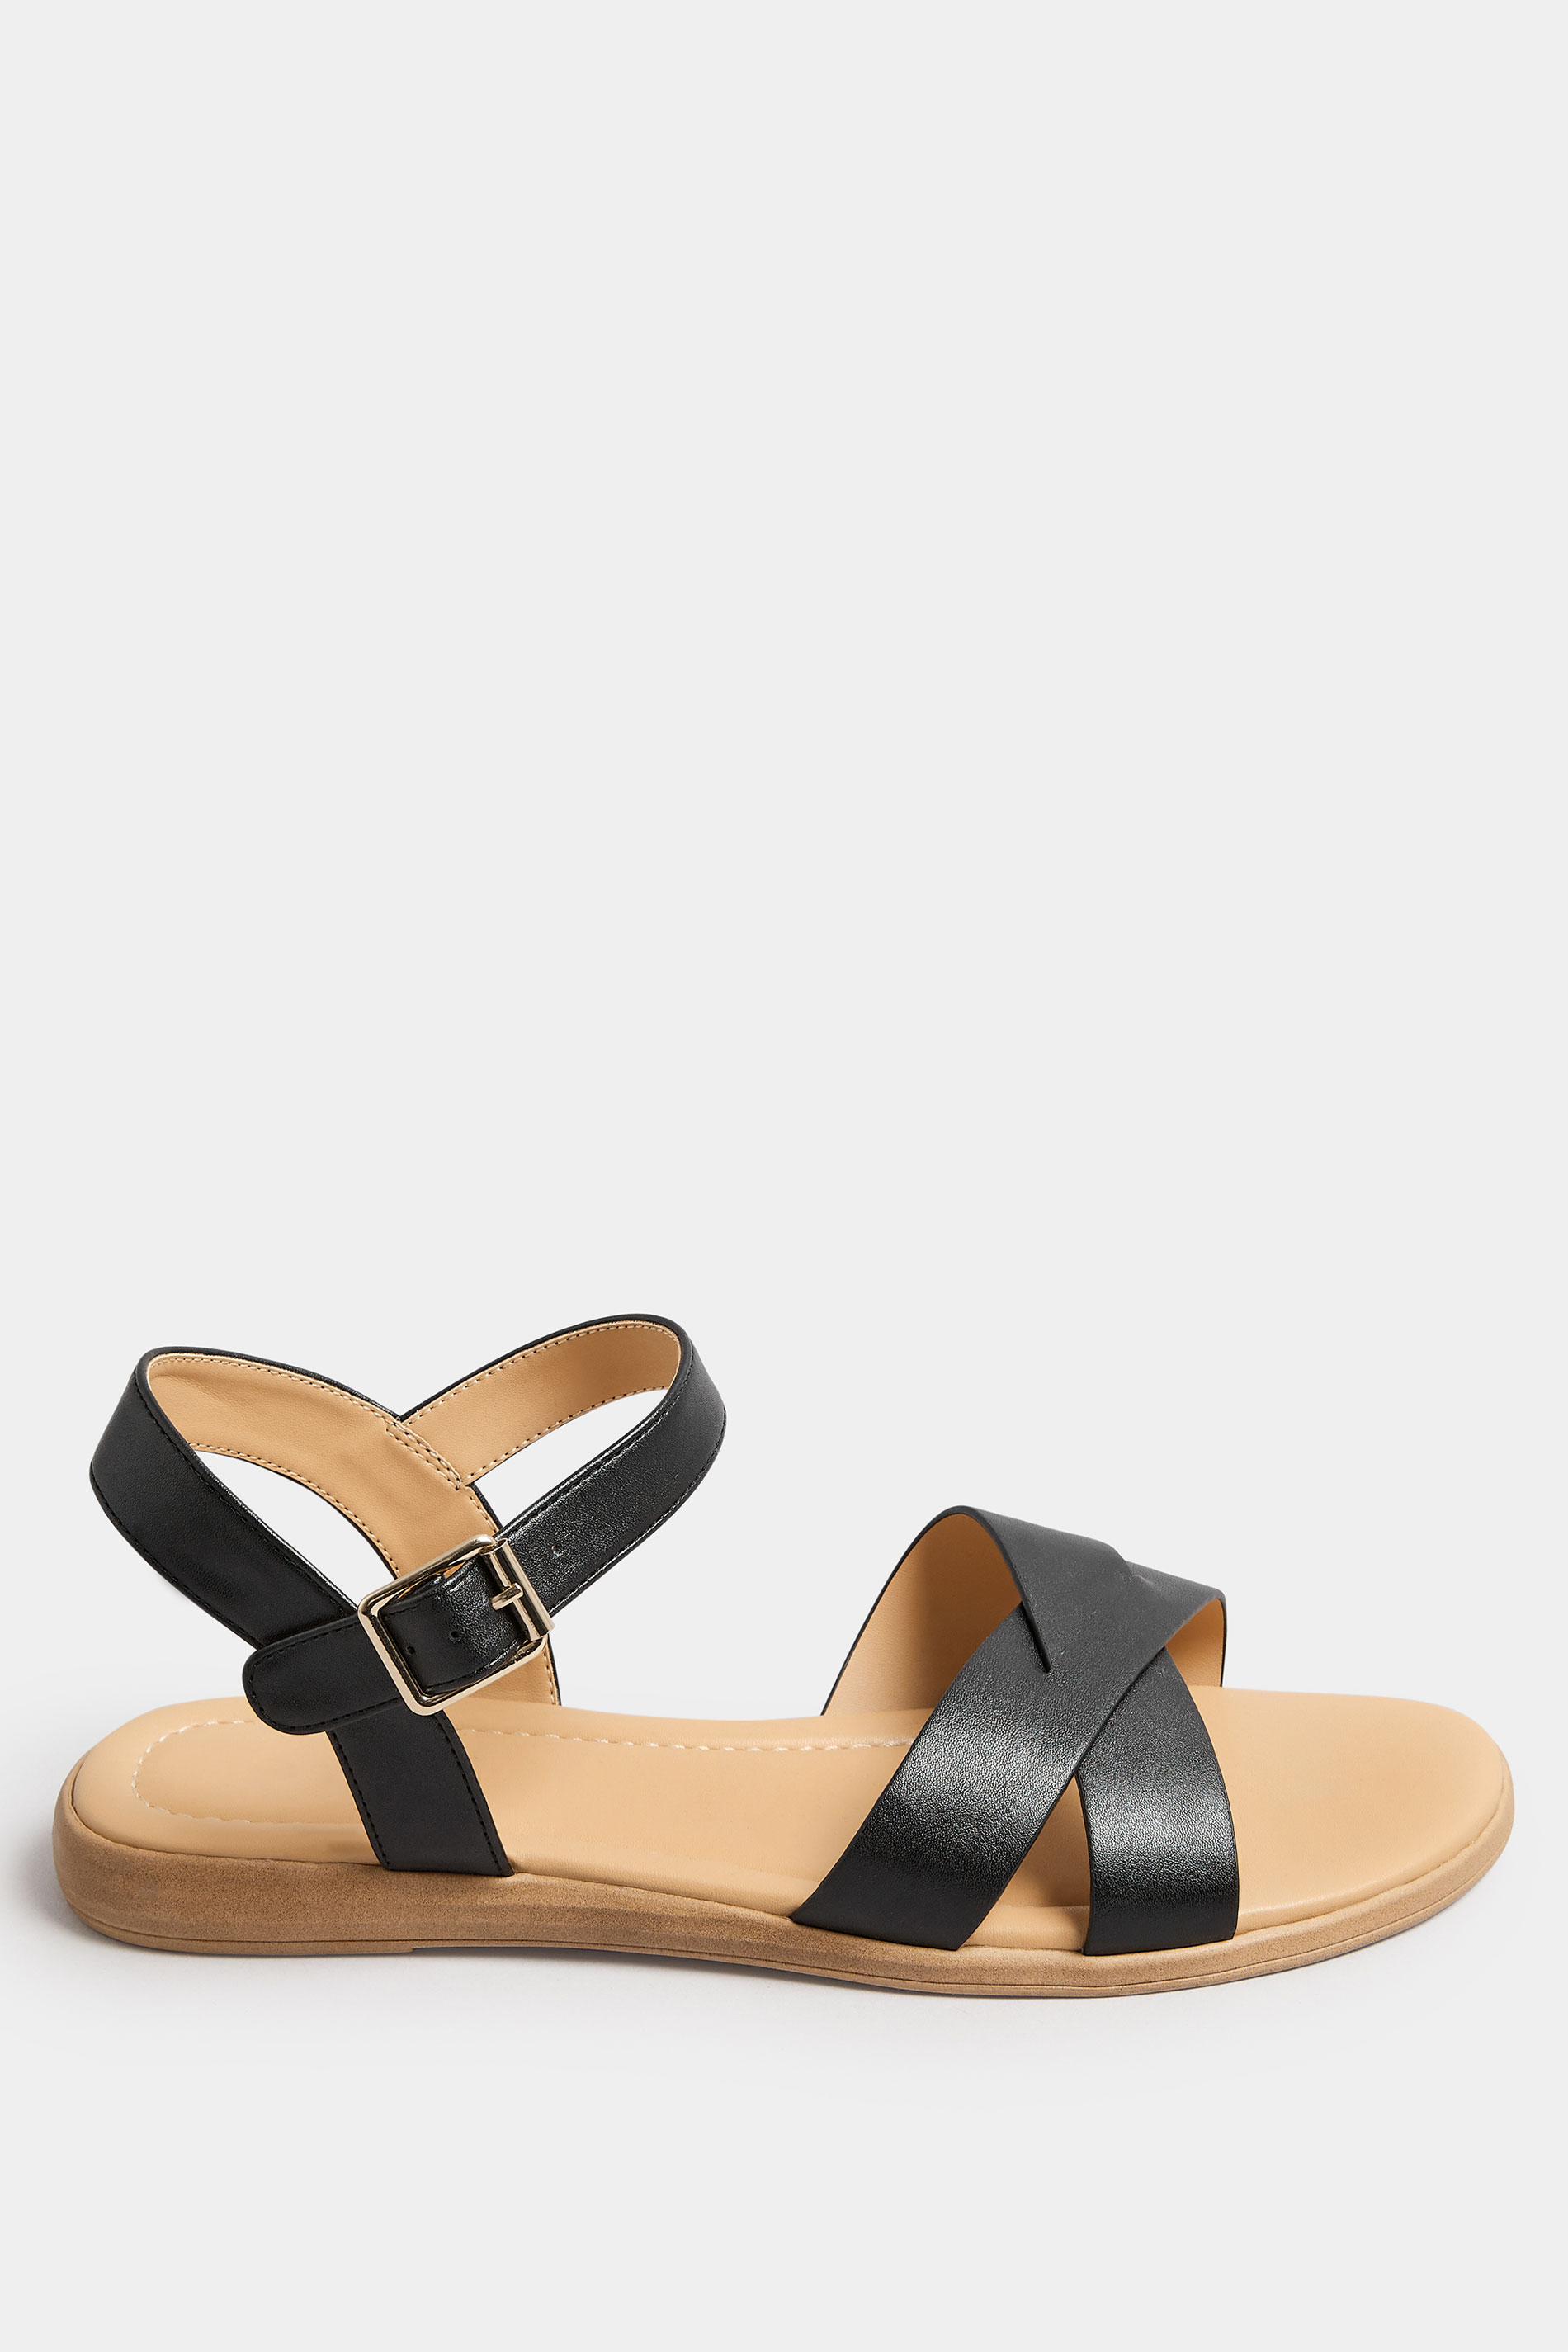 Black Cross Strap Sandals In Extra Wide EEE Fit | Yours Clothing 3